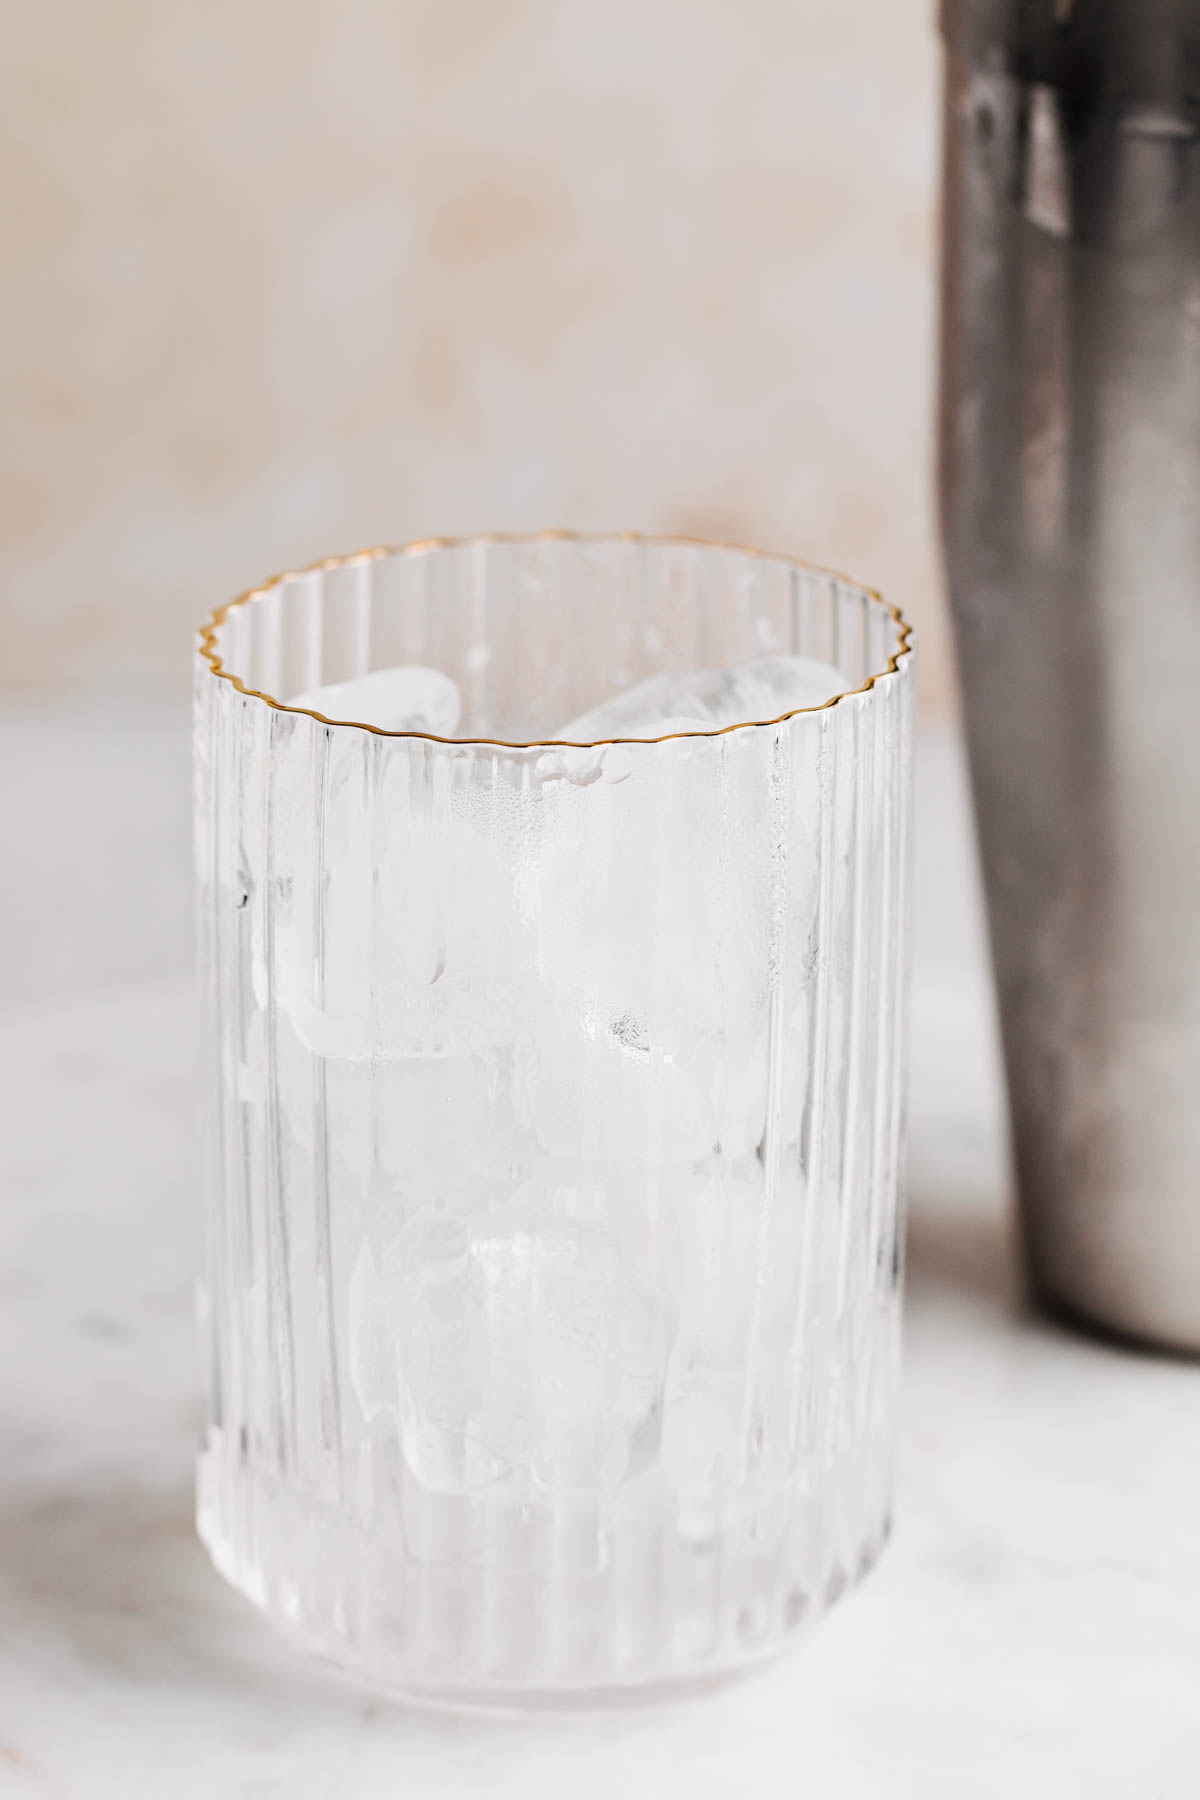 A ribbed glass with a gold rim on a light brown backdrop filled with ice cubes and a silver colored condensed cocktail shaker in the background.